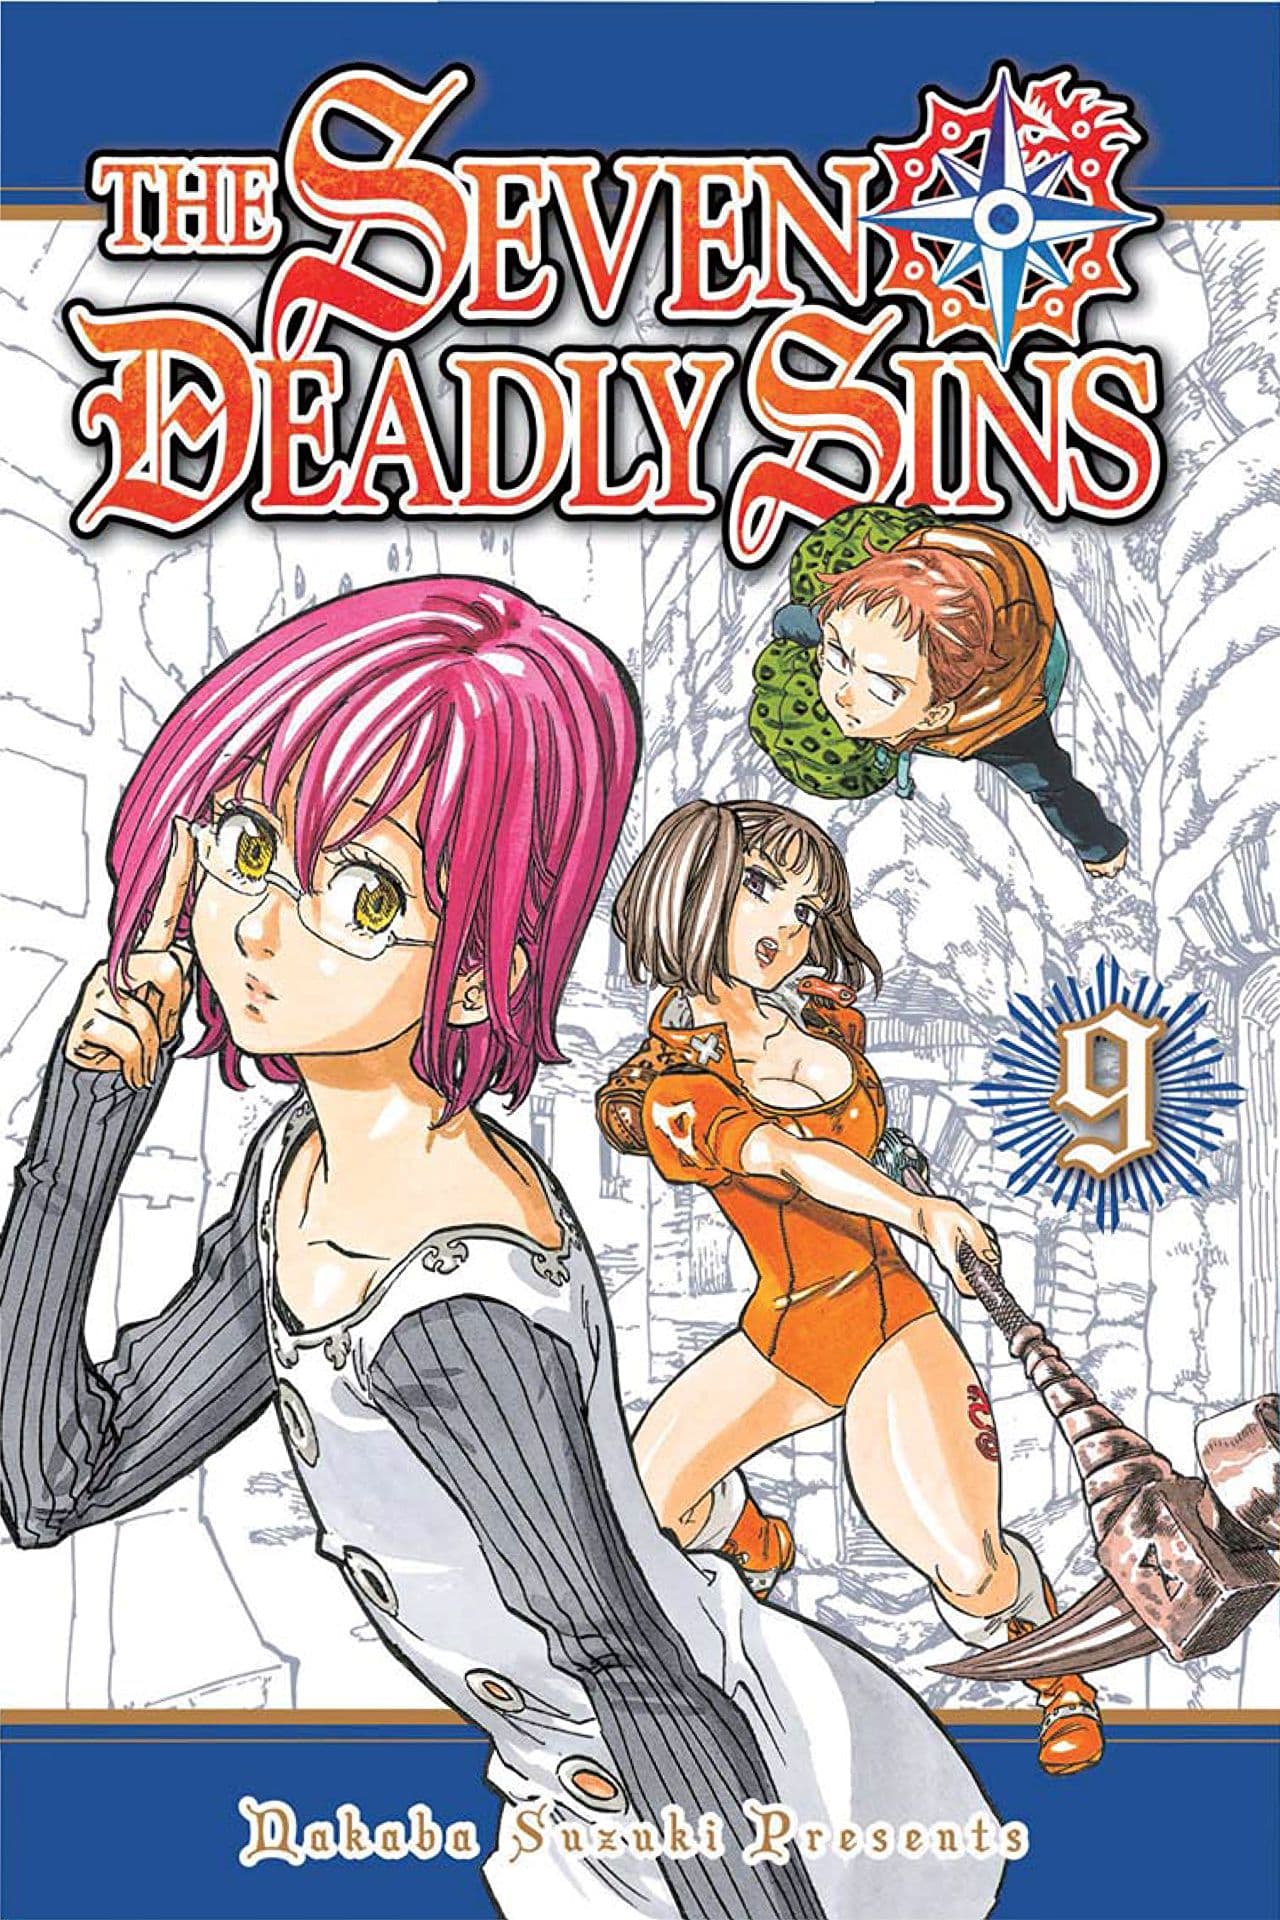 The Seven Deadly Sins Vol. 9 Review